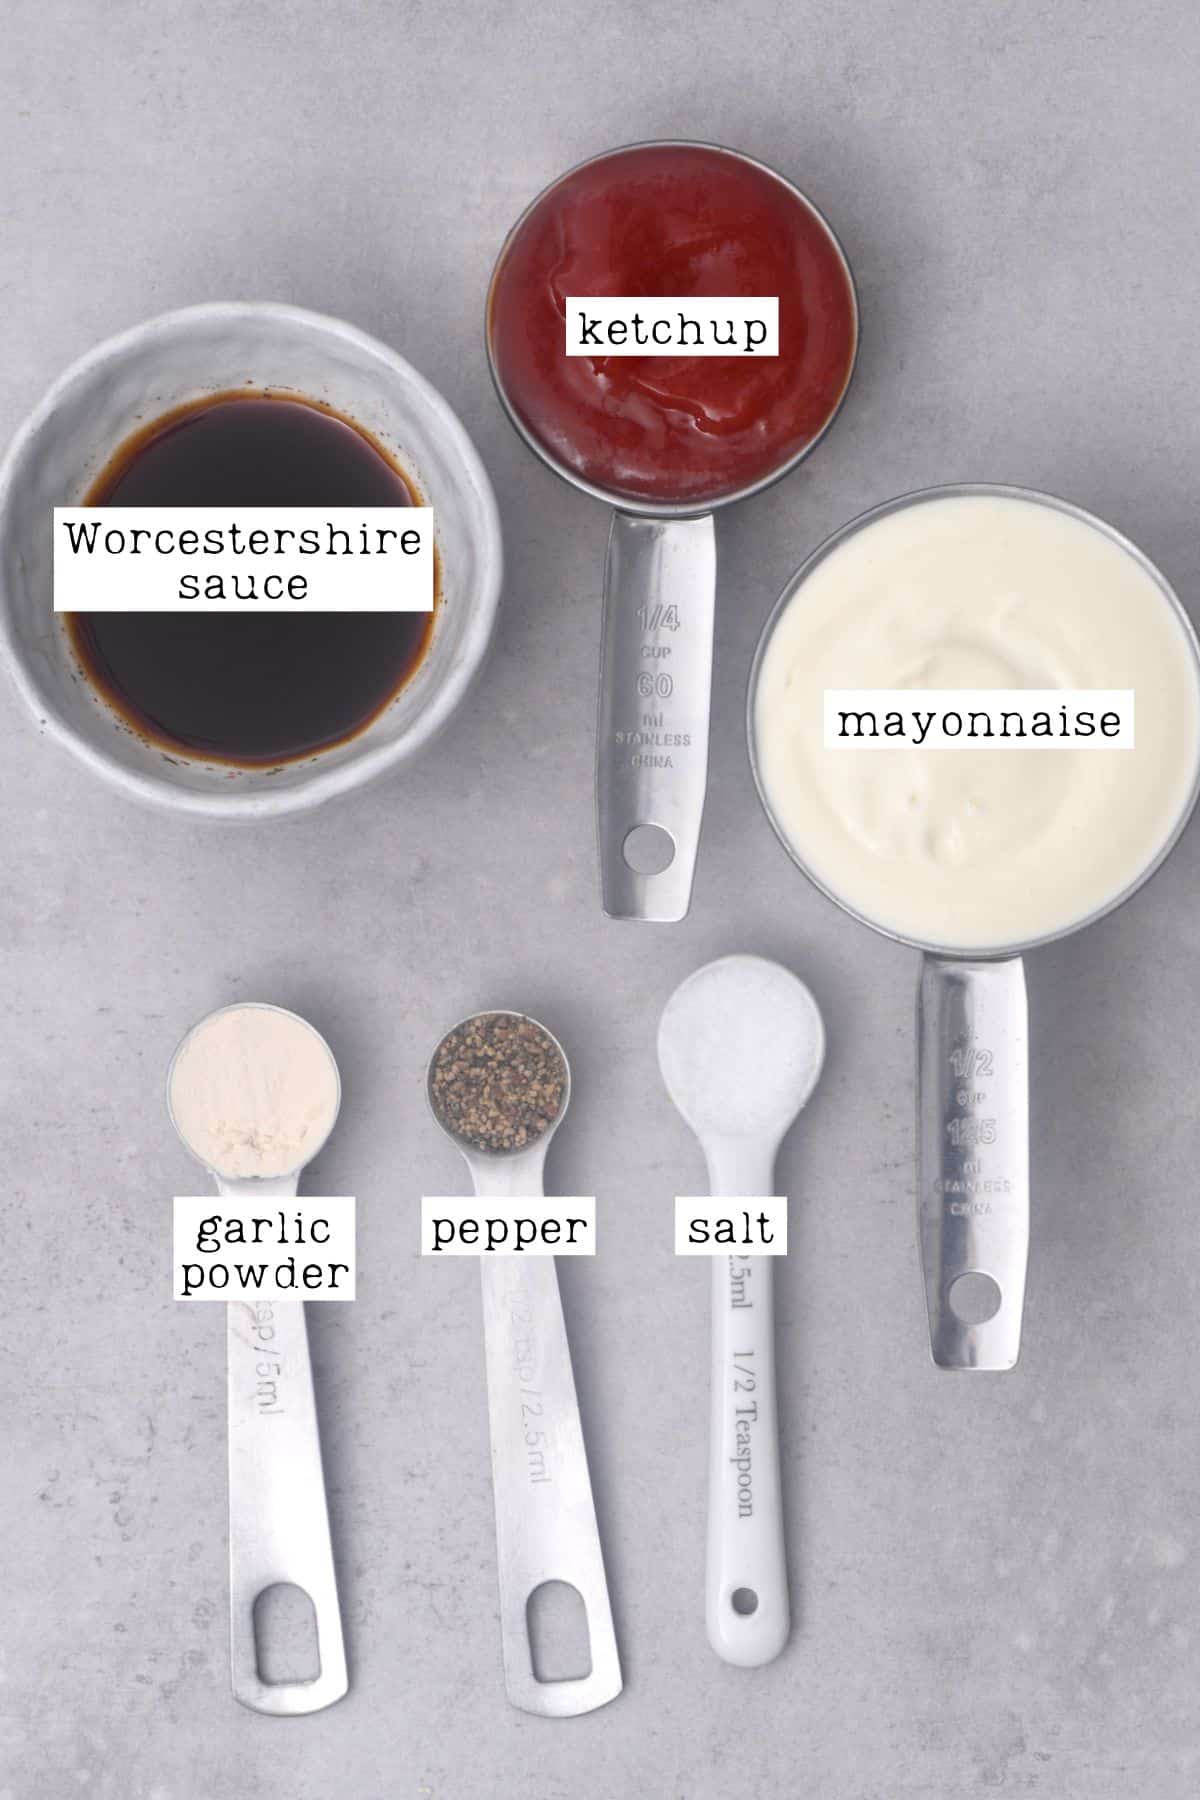 Ingredients for Raising Cane's sauce